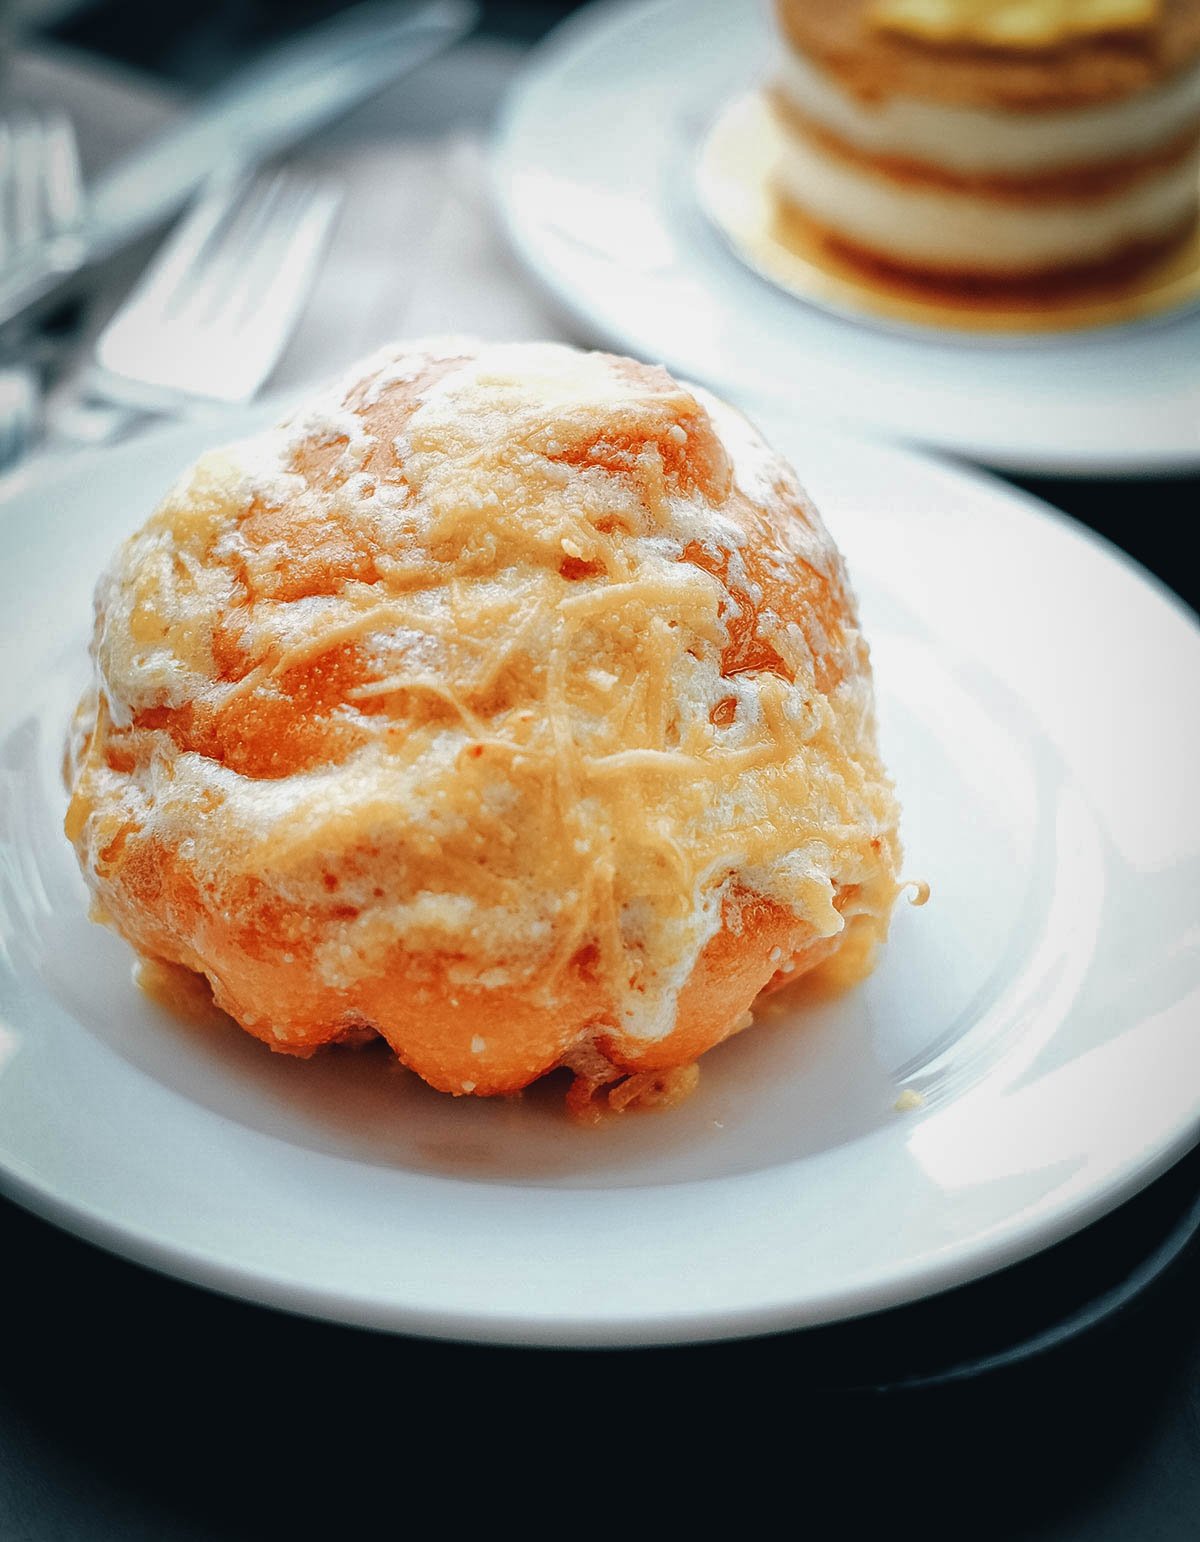 Ensaymada, a popular pastry in the Philippines